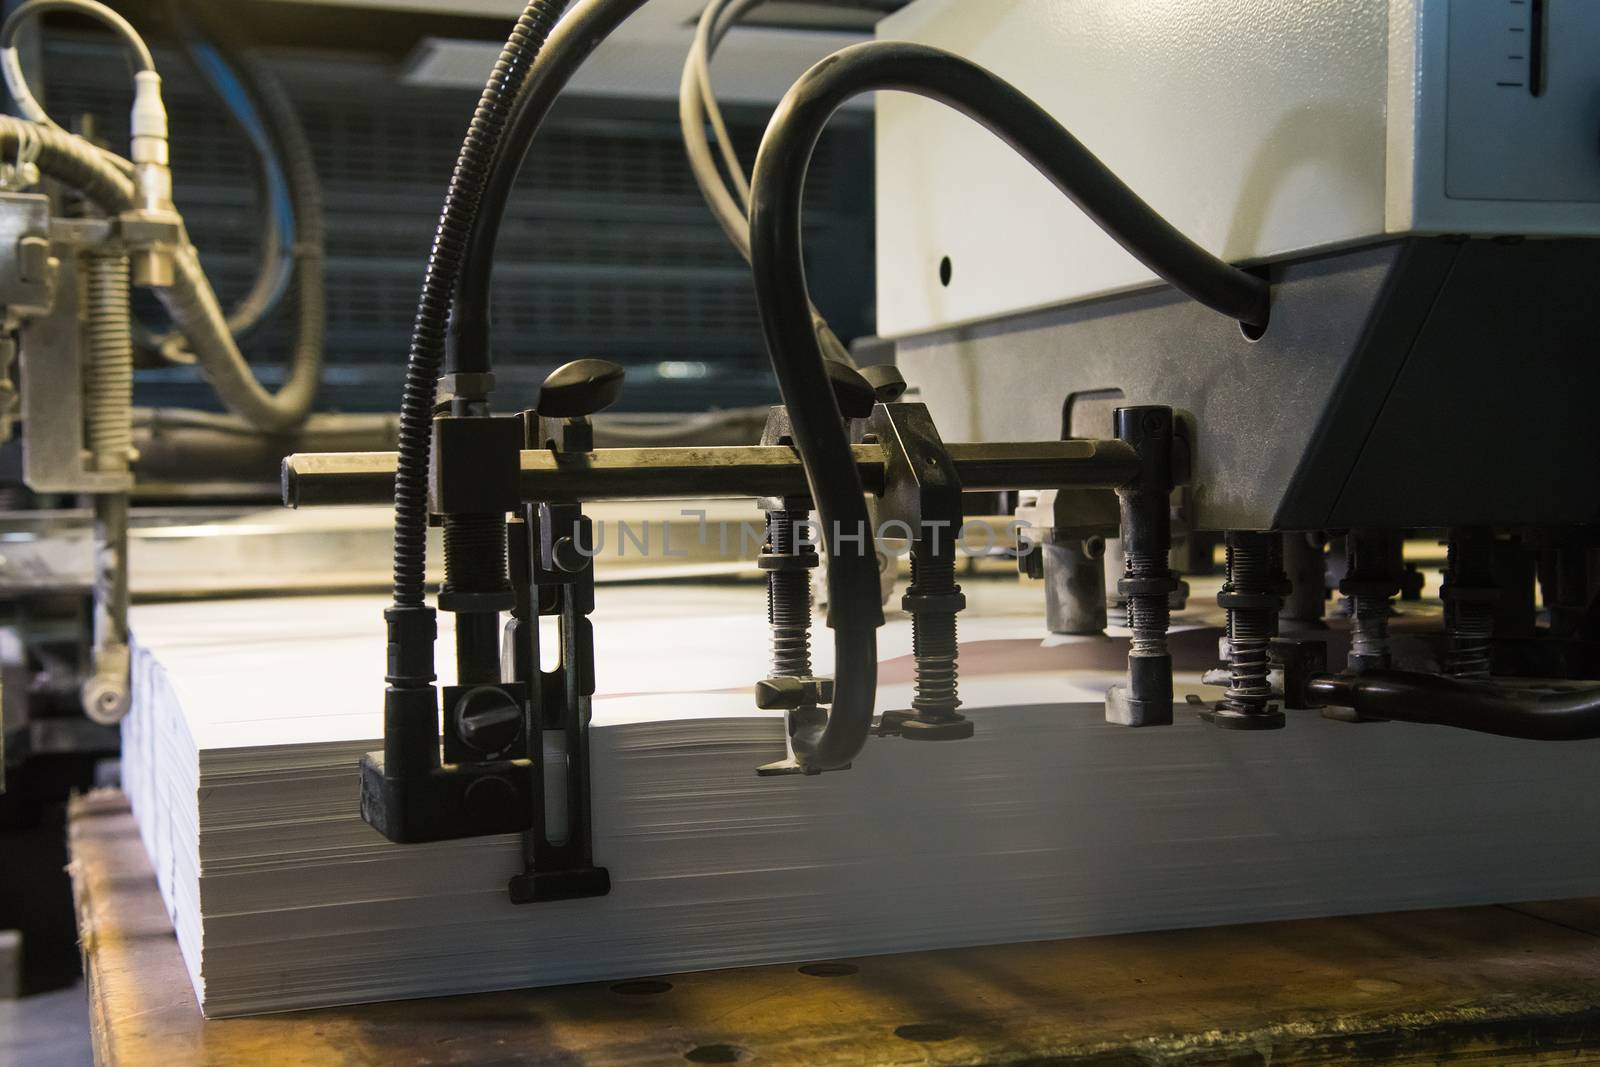 Printing presses at work in the printing. Printed sheets of paper are served in the printing press